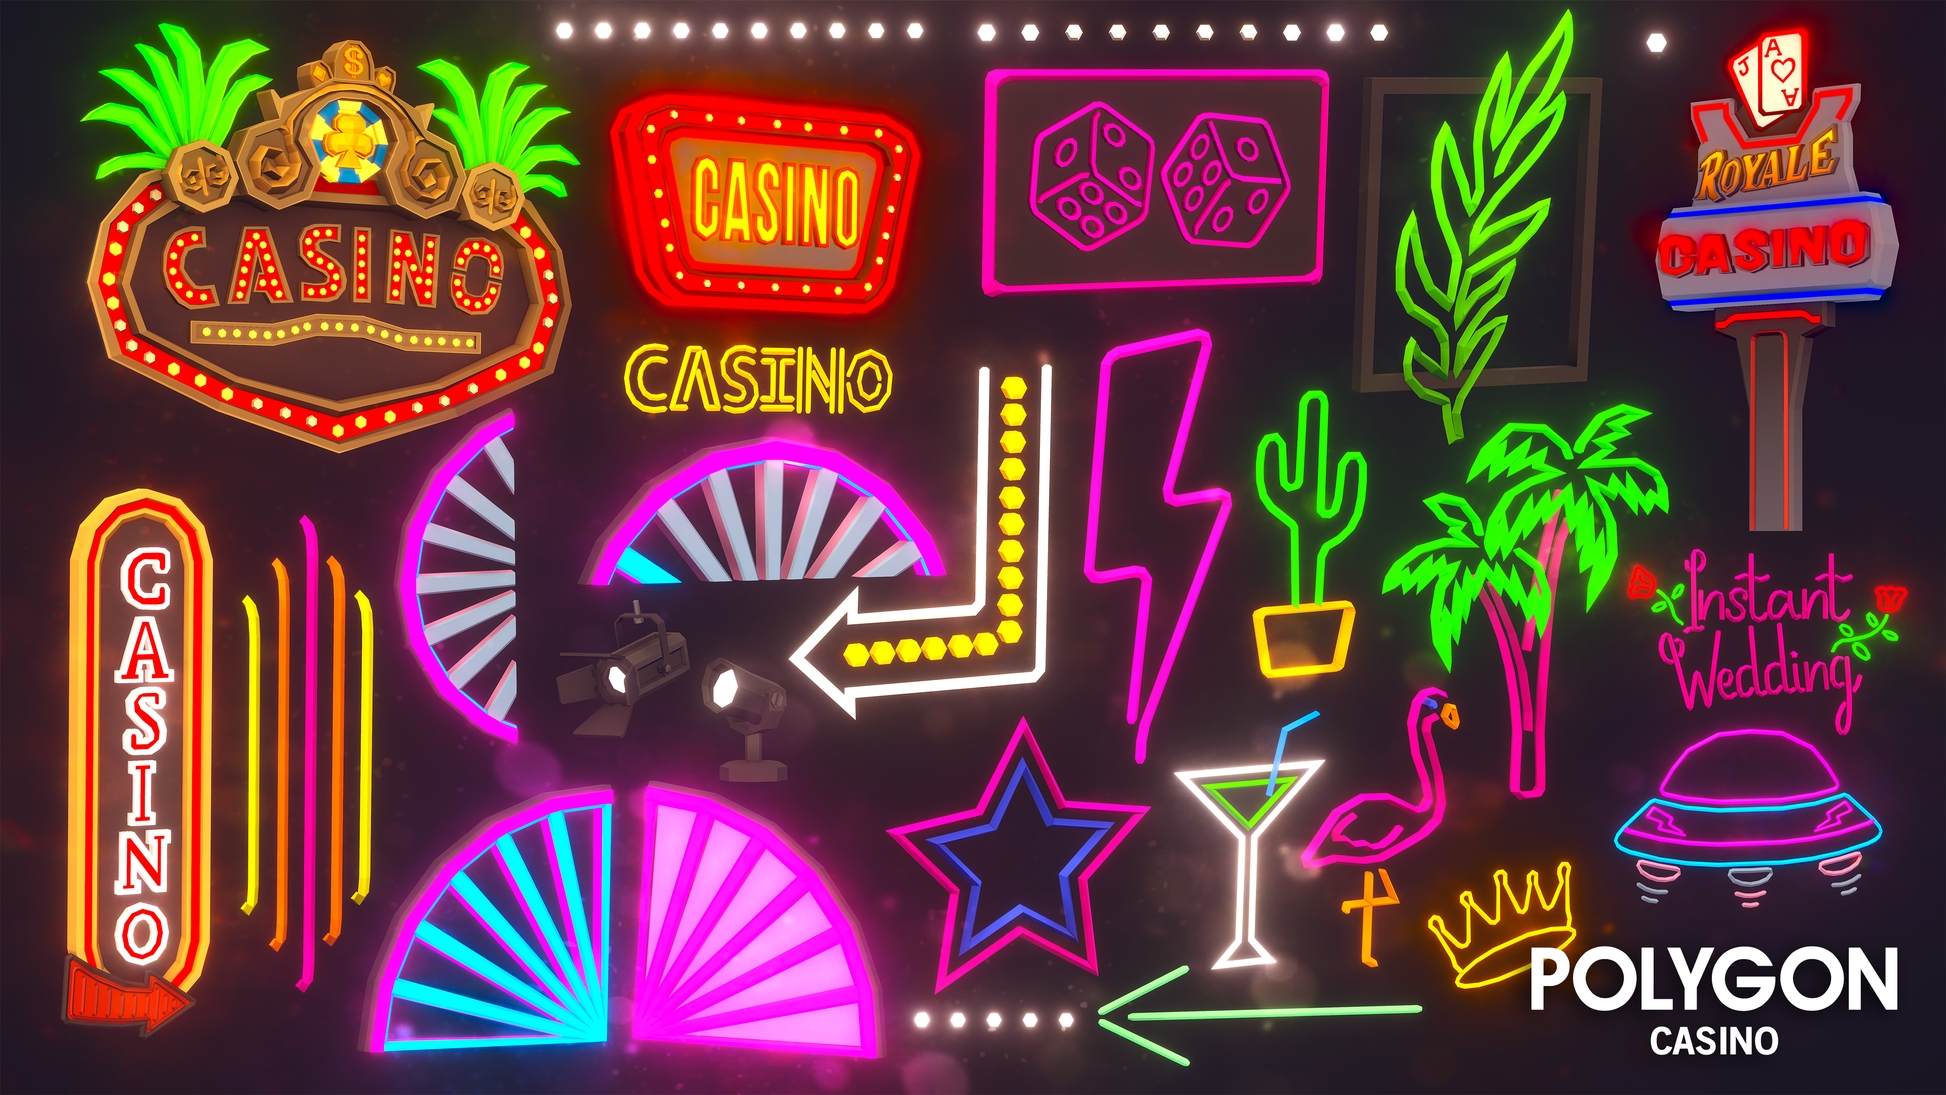 POLYGON Casino 3D asset pack for Unity and Unreal Engine game development